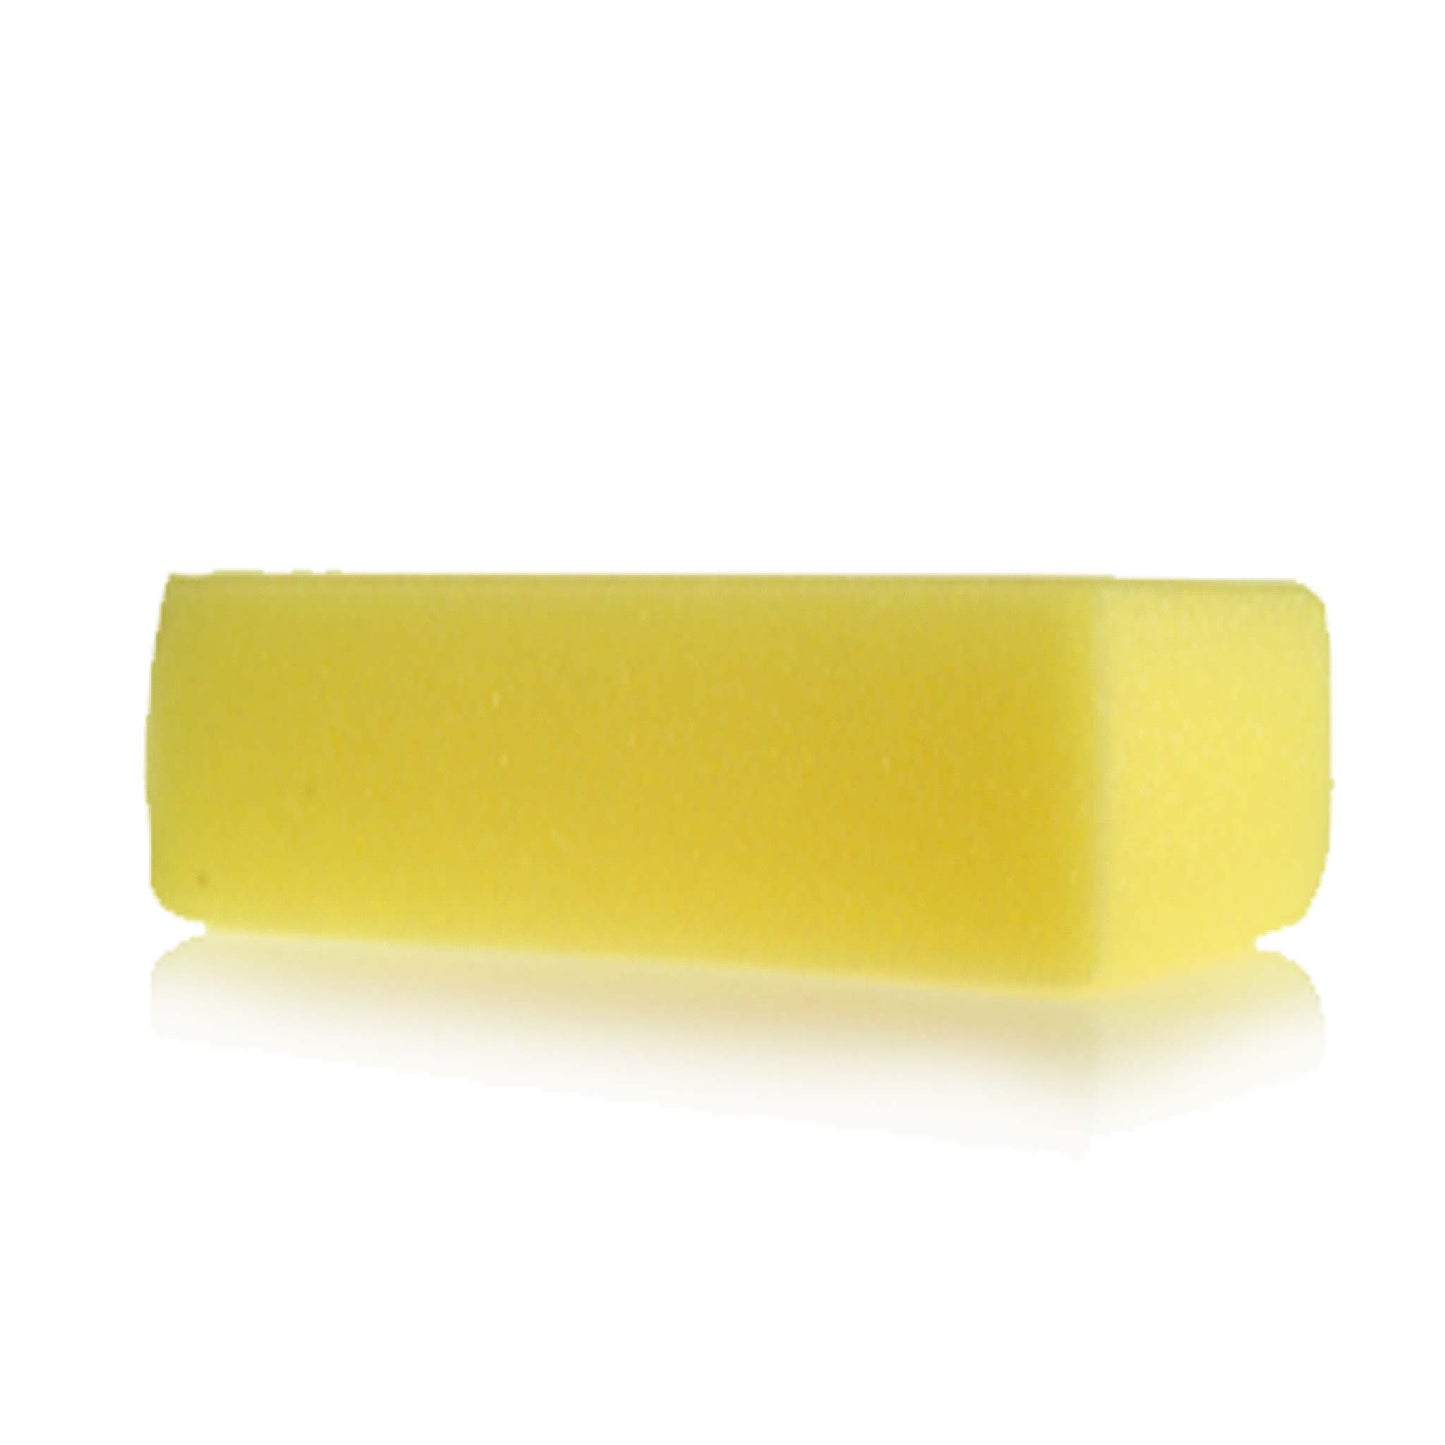 Sponge™ - Silicone Free Heavyweight Closed Cell